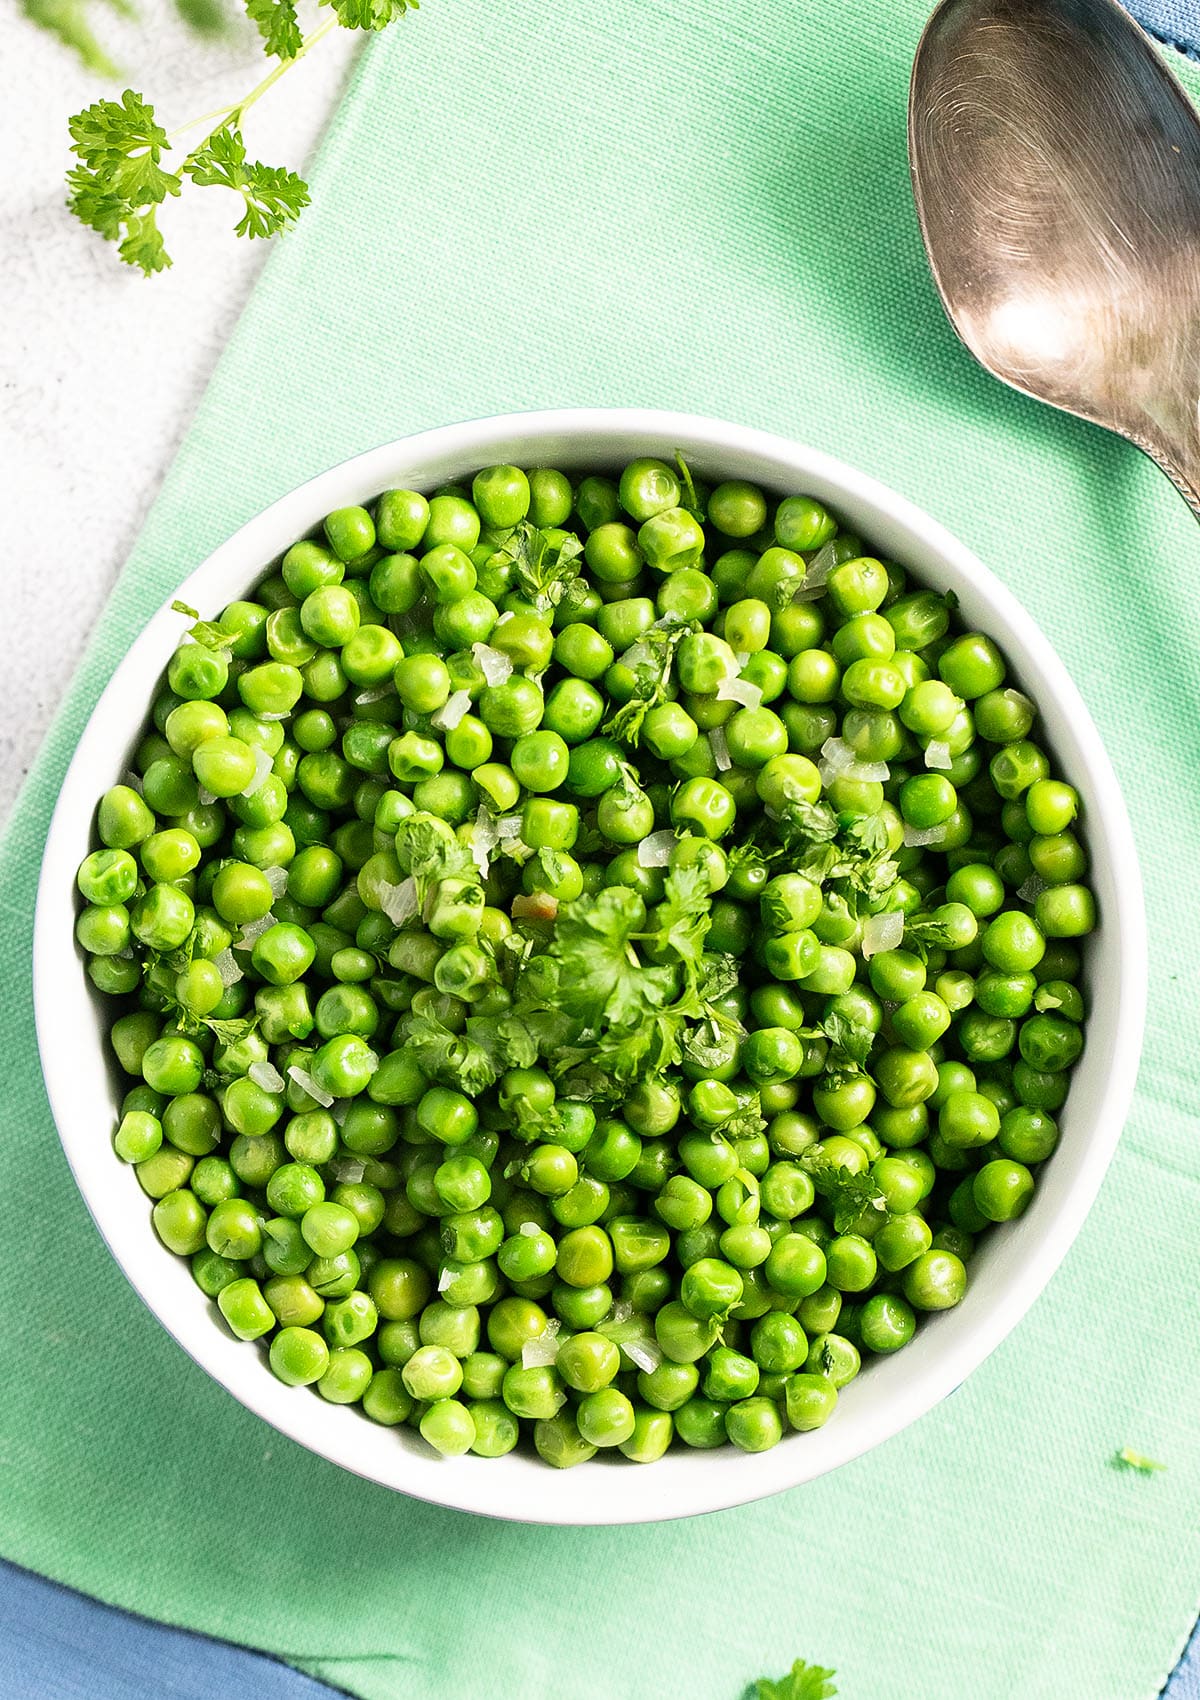 buttered peas sprinkled with parsley in a bowl on a green cloth.